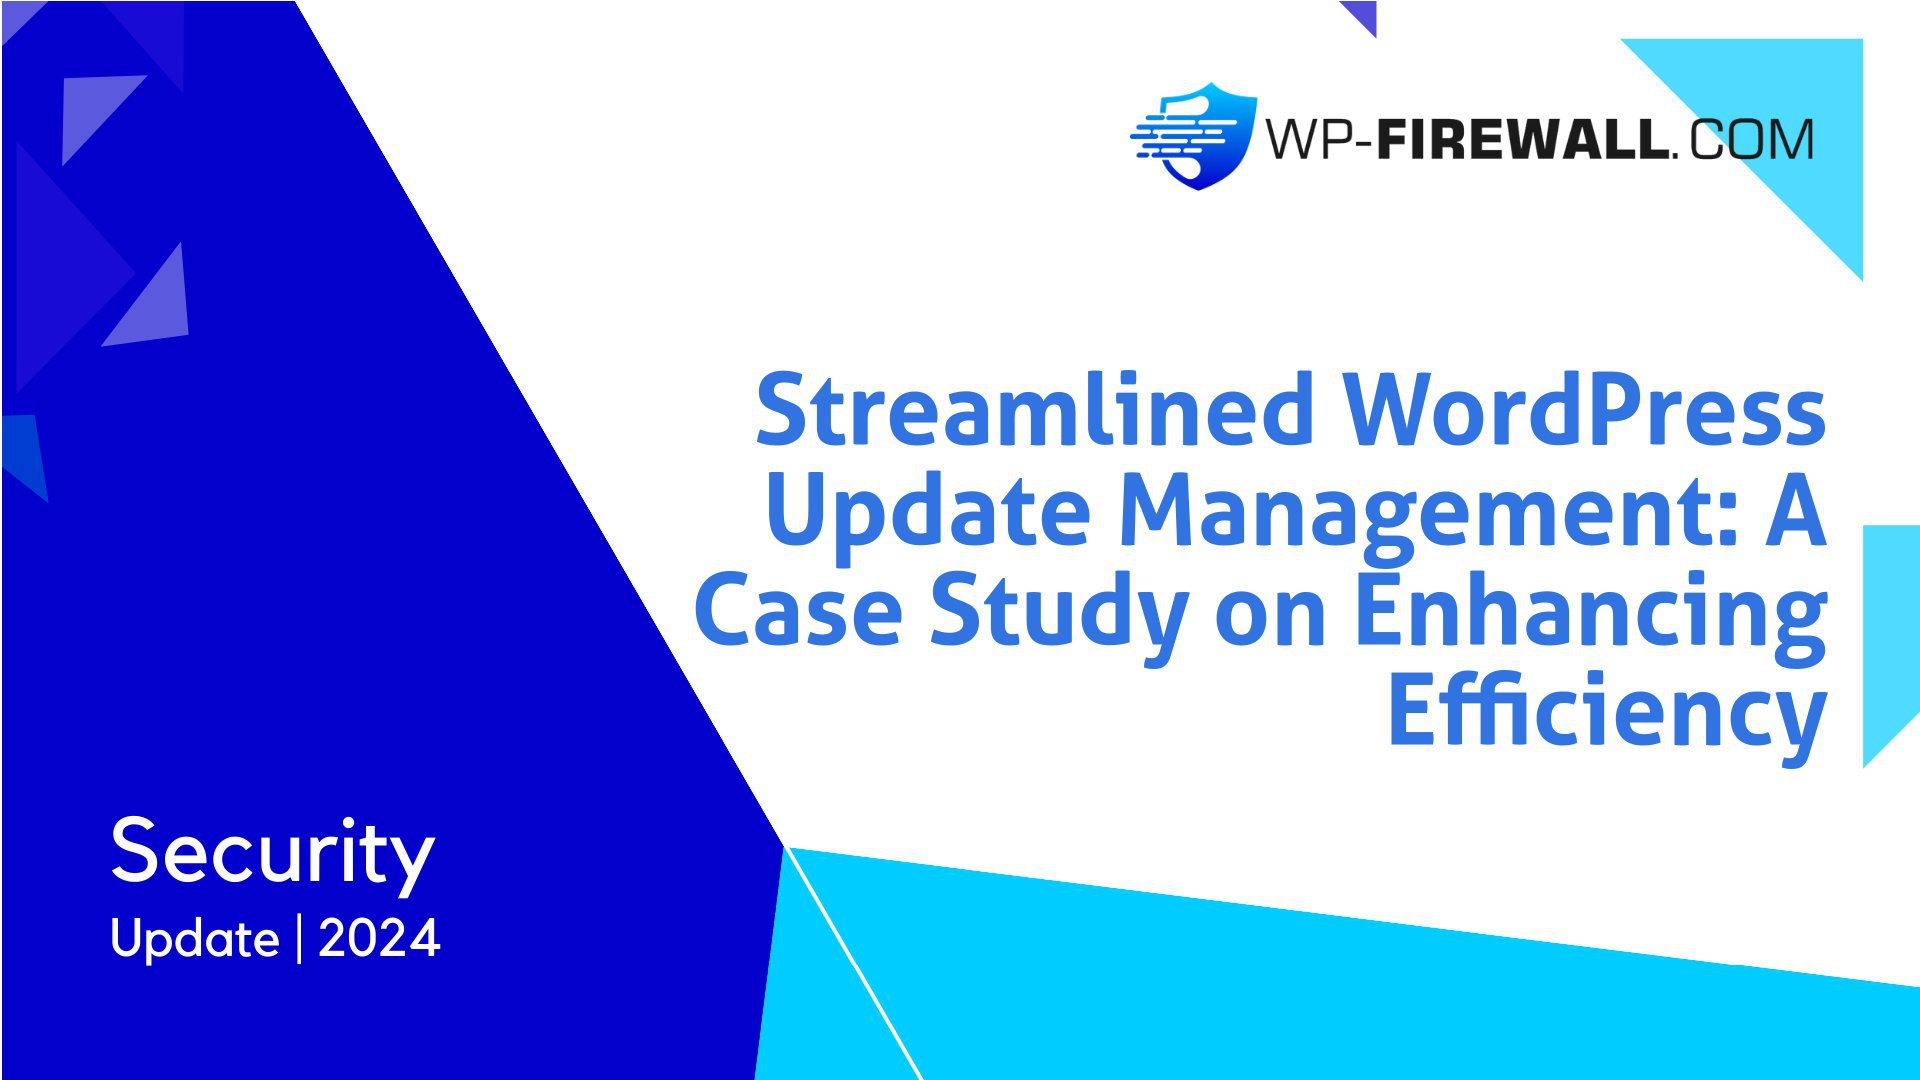 Streamlined WordPress Patch Update Management: A Case Study on Enhancing Efficiency cover